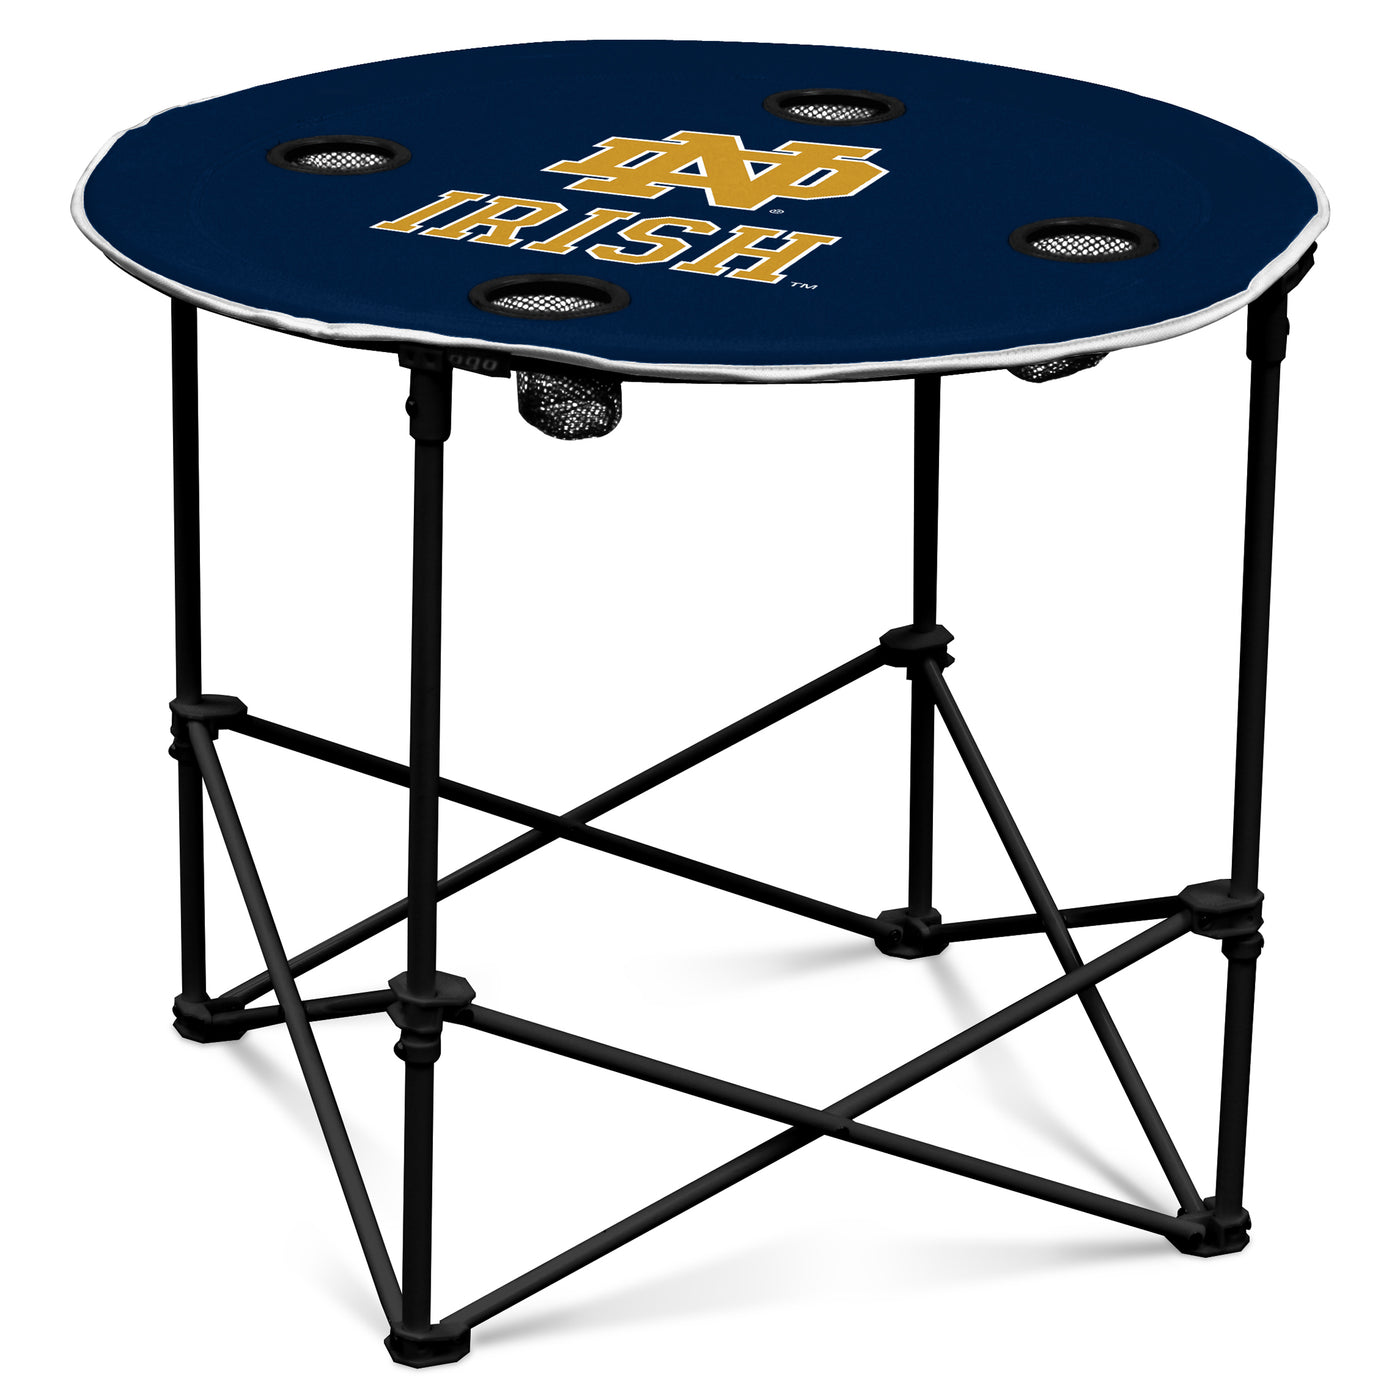 Notre Dame Navy/White Round Table